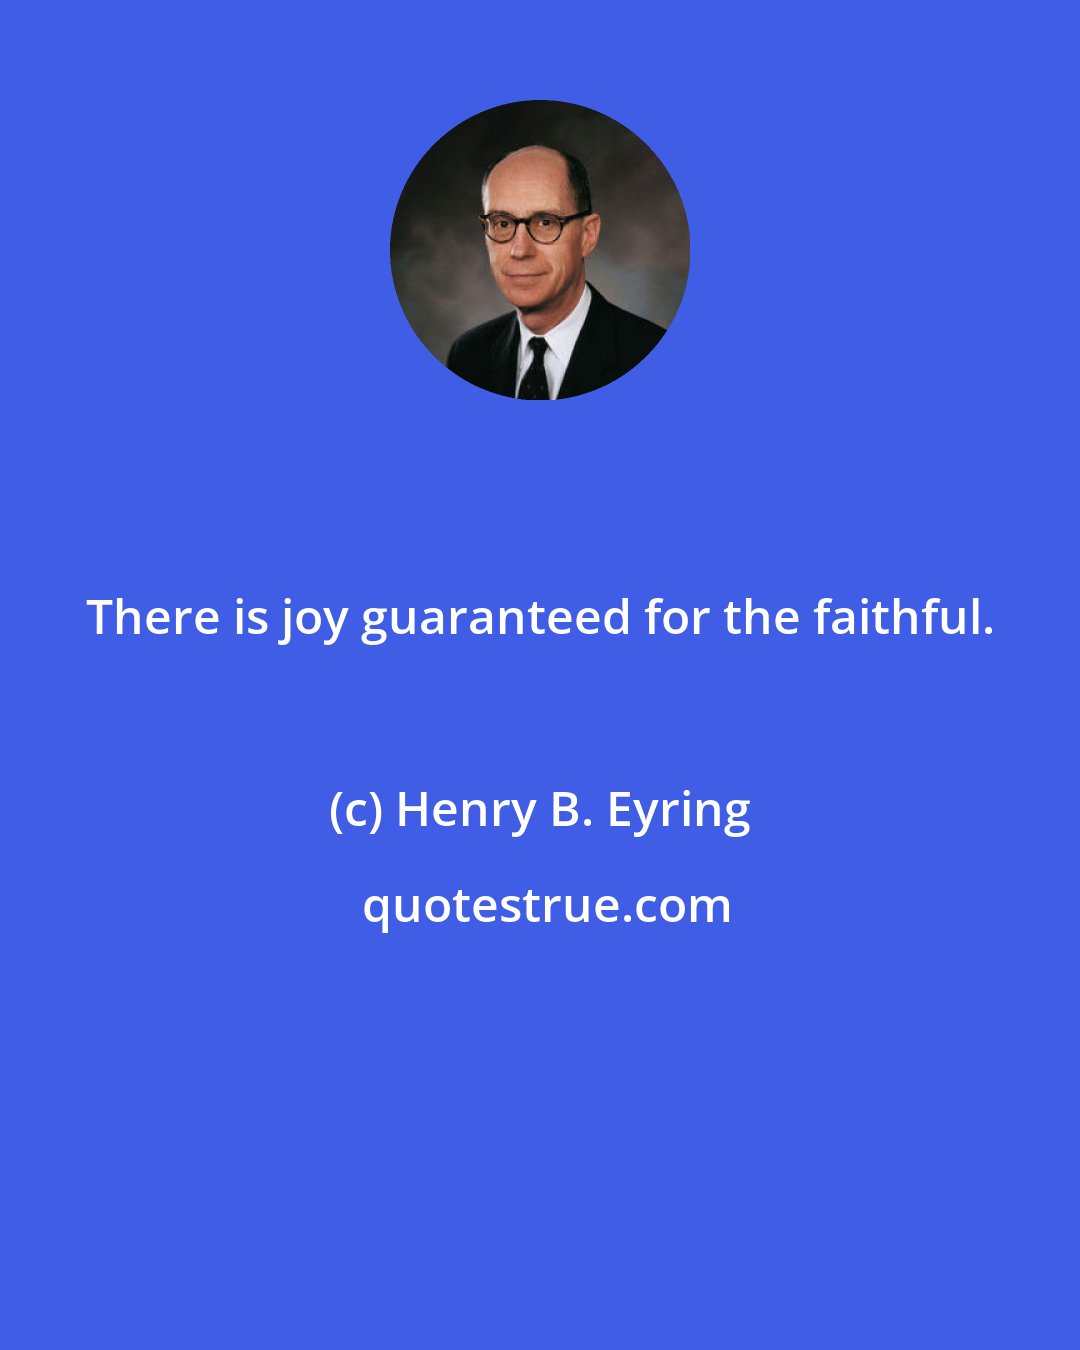 Henry B. Eyring: There is joy guaranteed for the faithful.